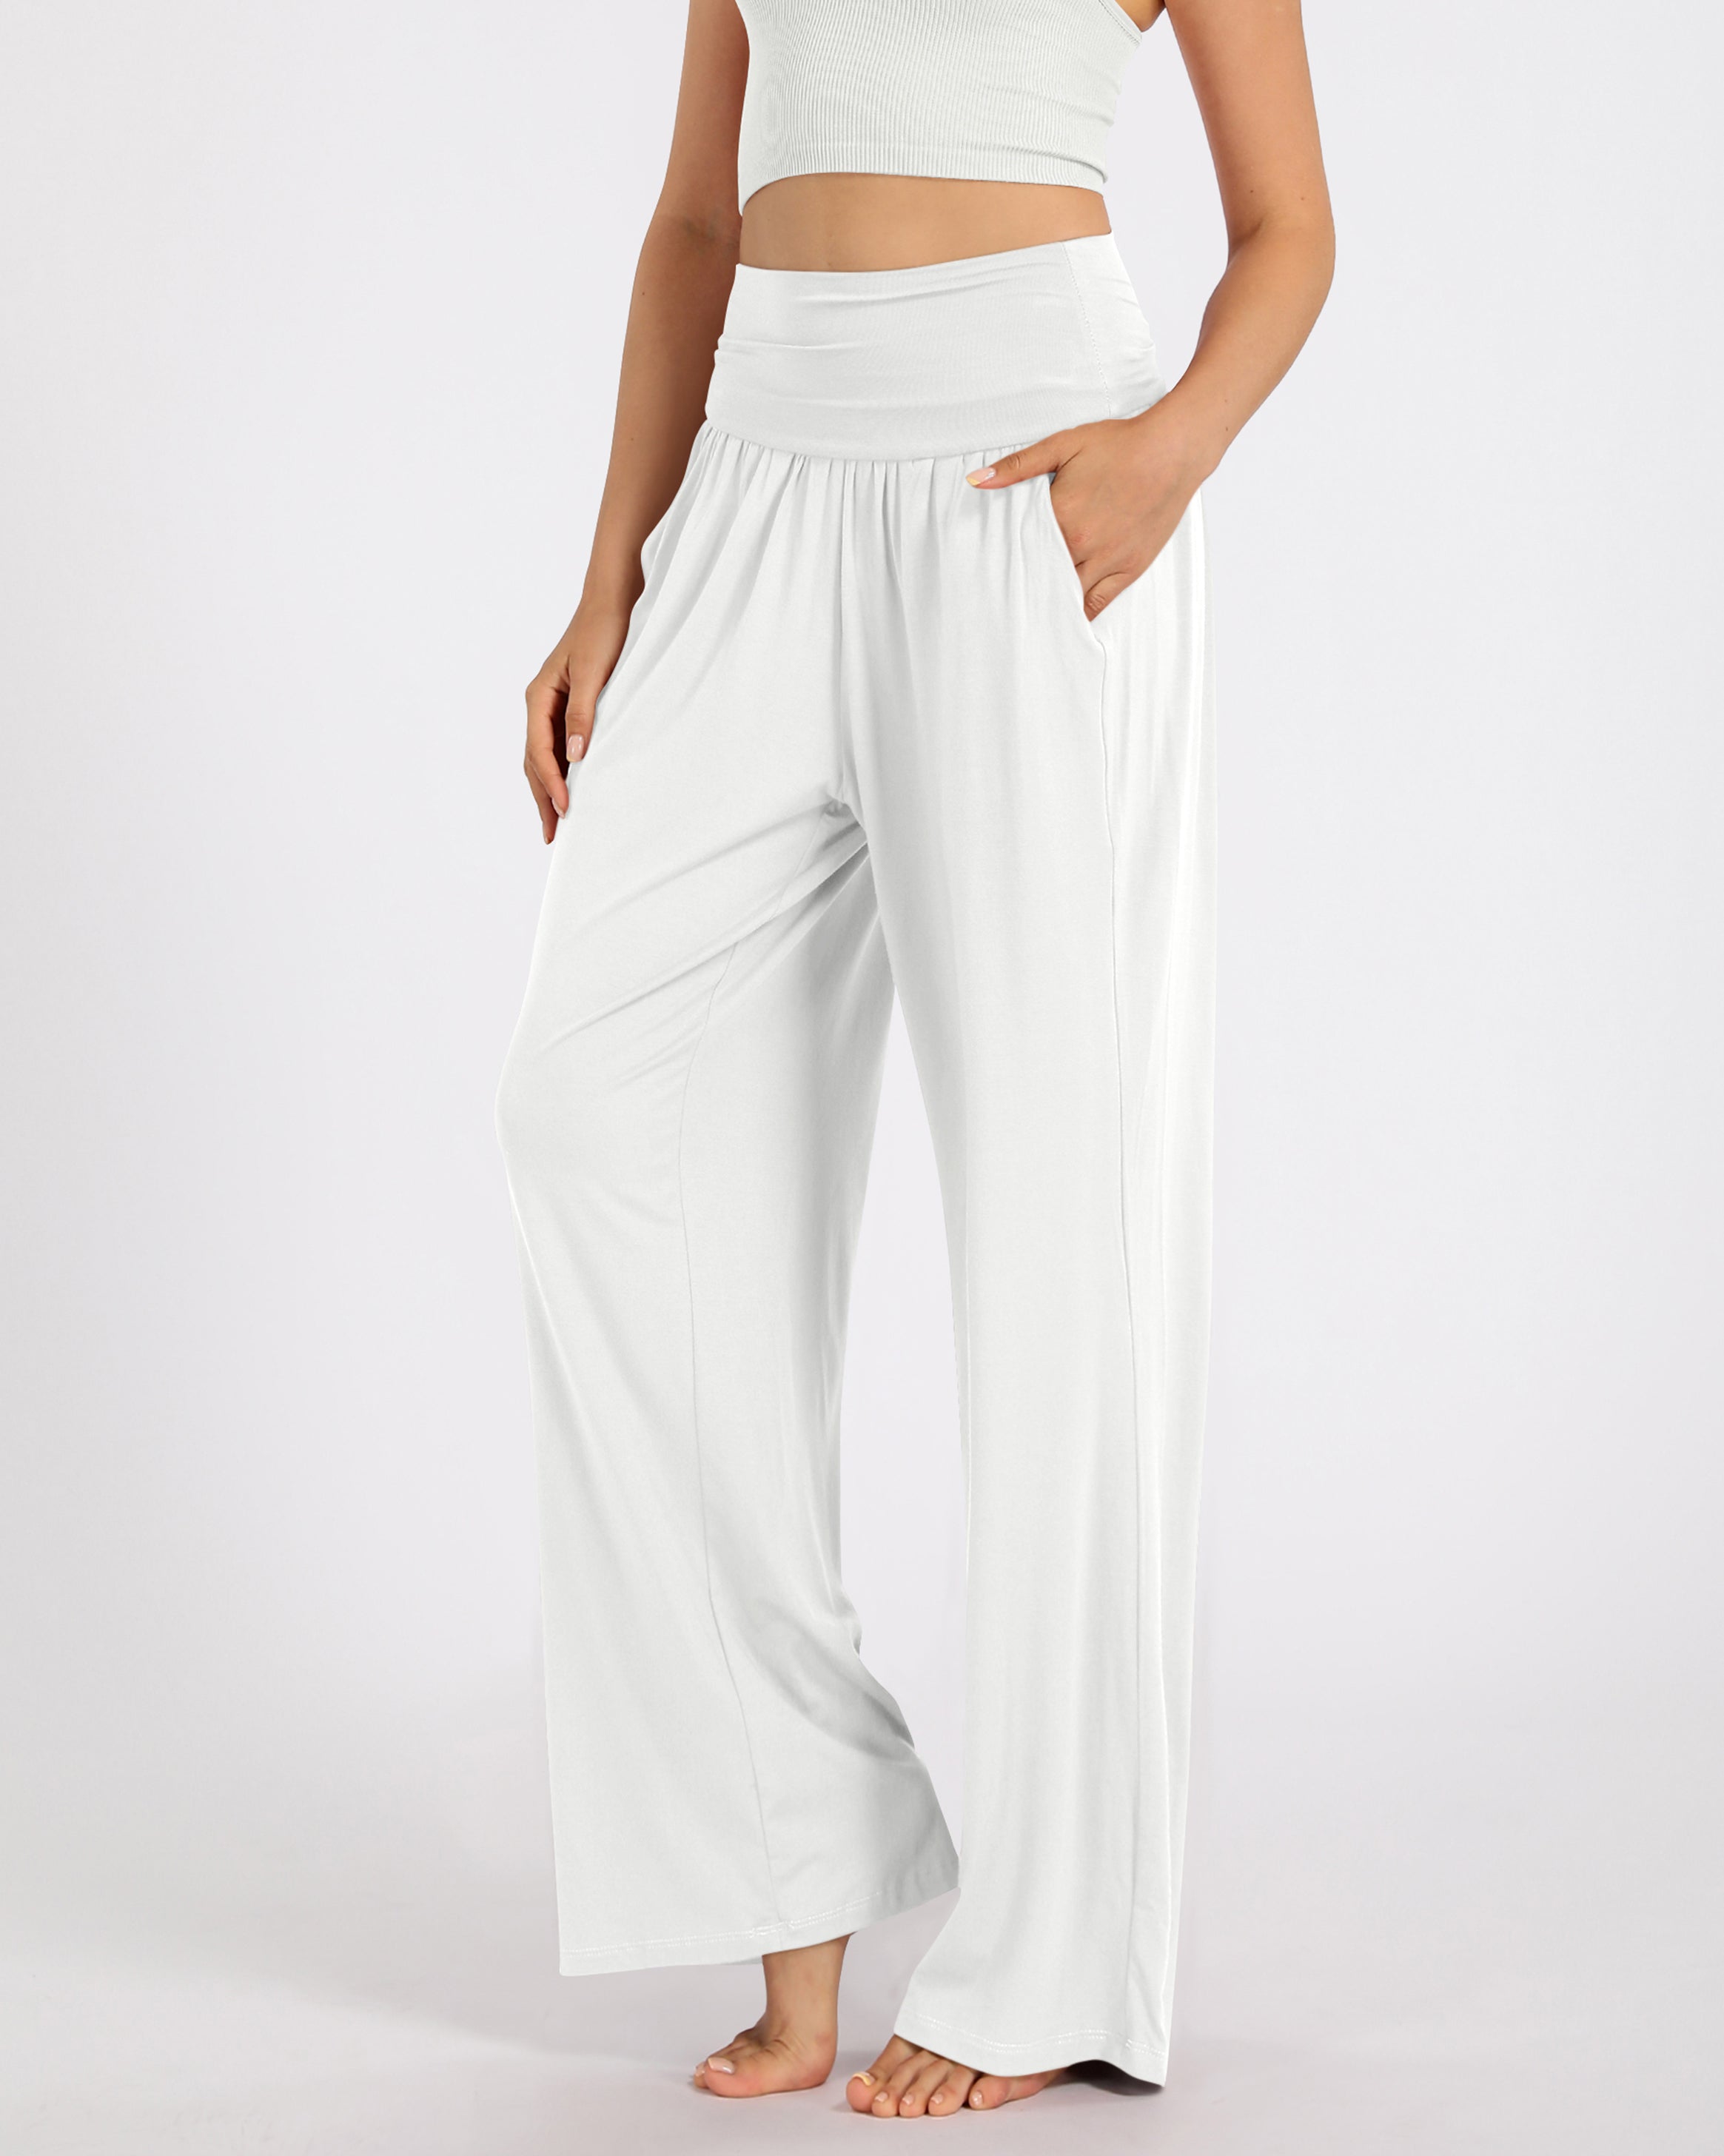 Wide Leg Lounge Pants with Pockets White - ododos